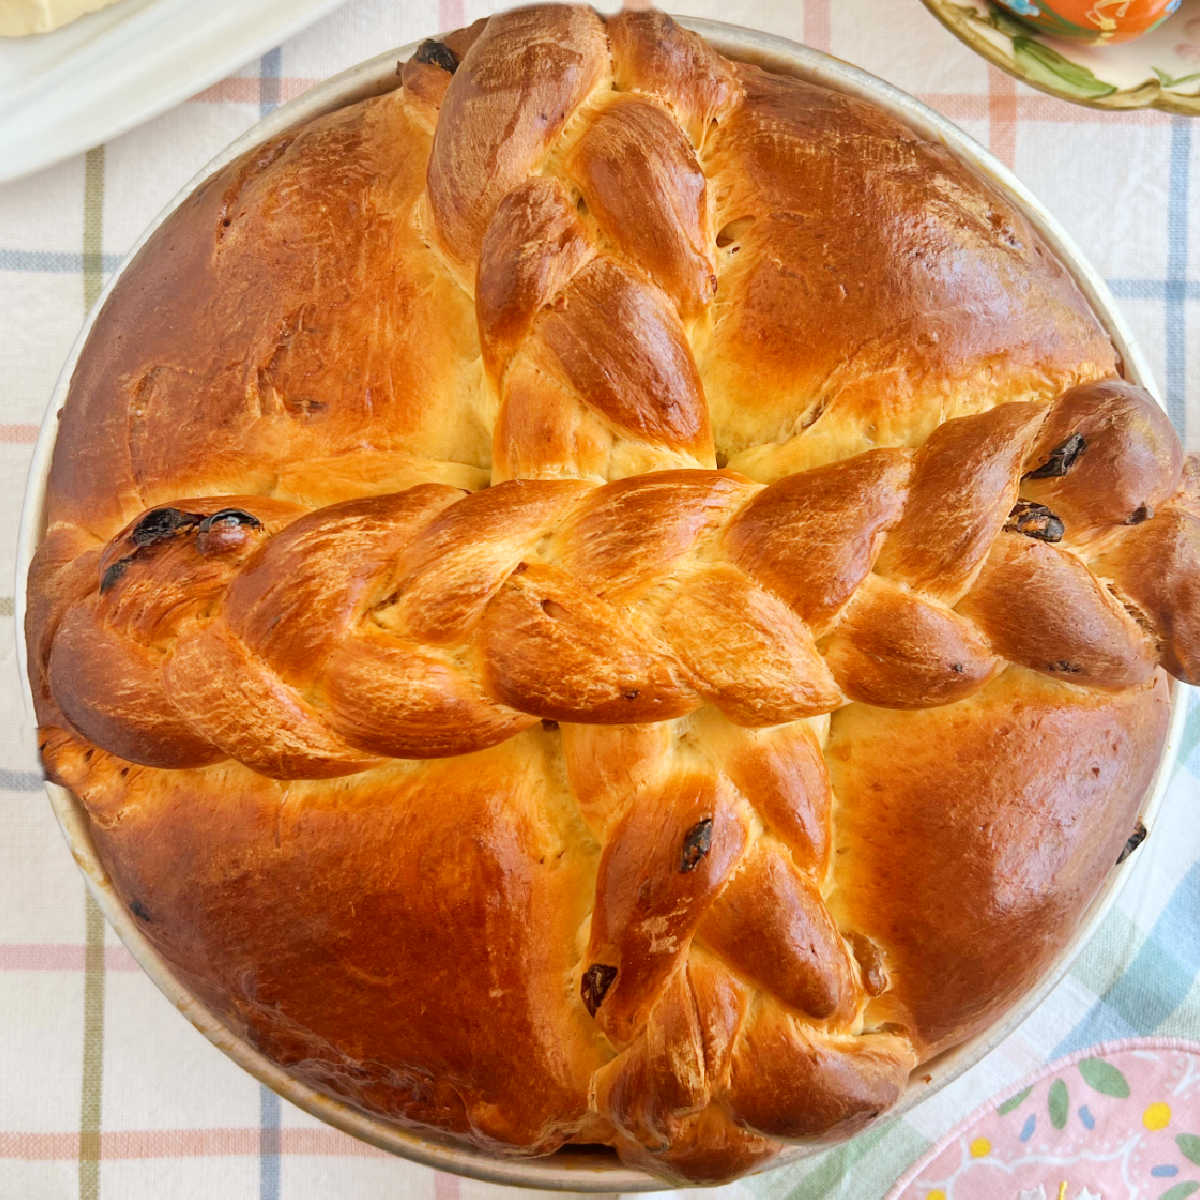 Slovak Easter Paska bread with golden raisins and braided cross in on table